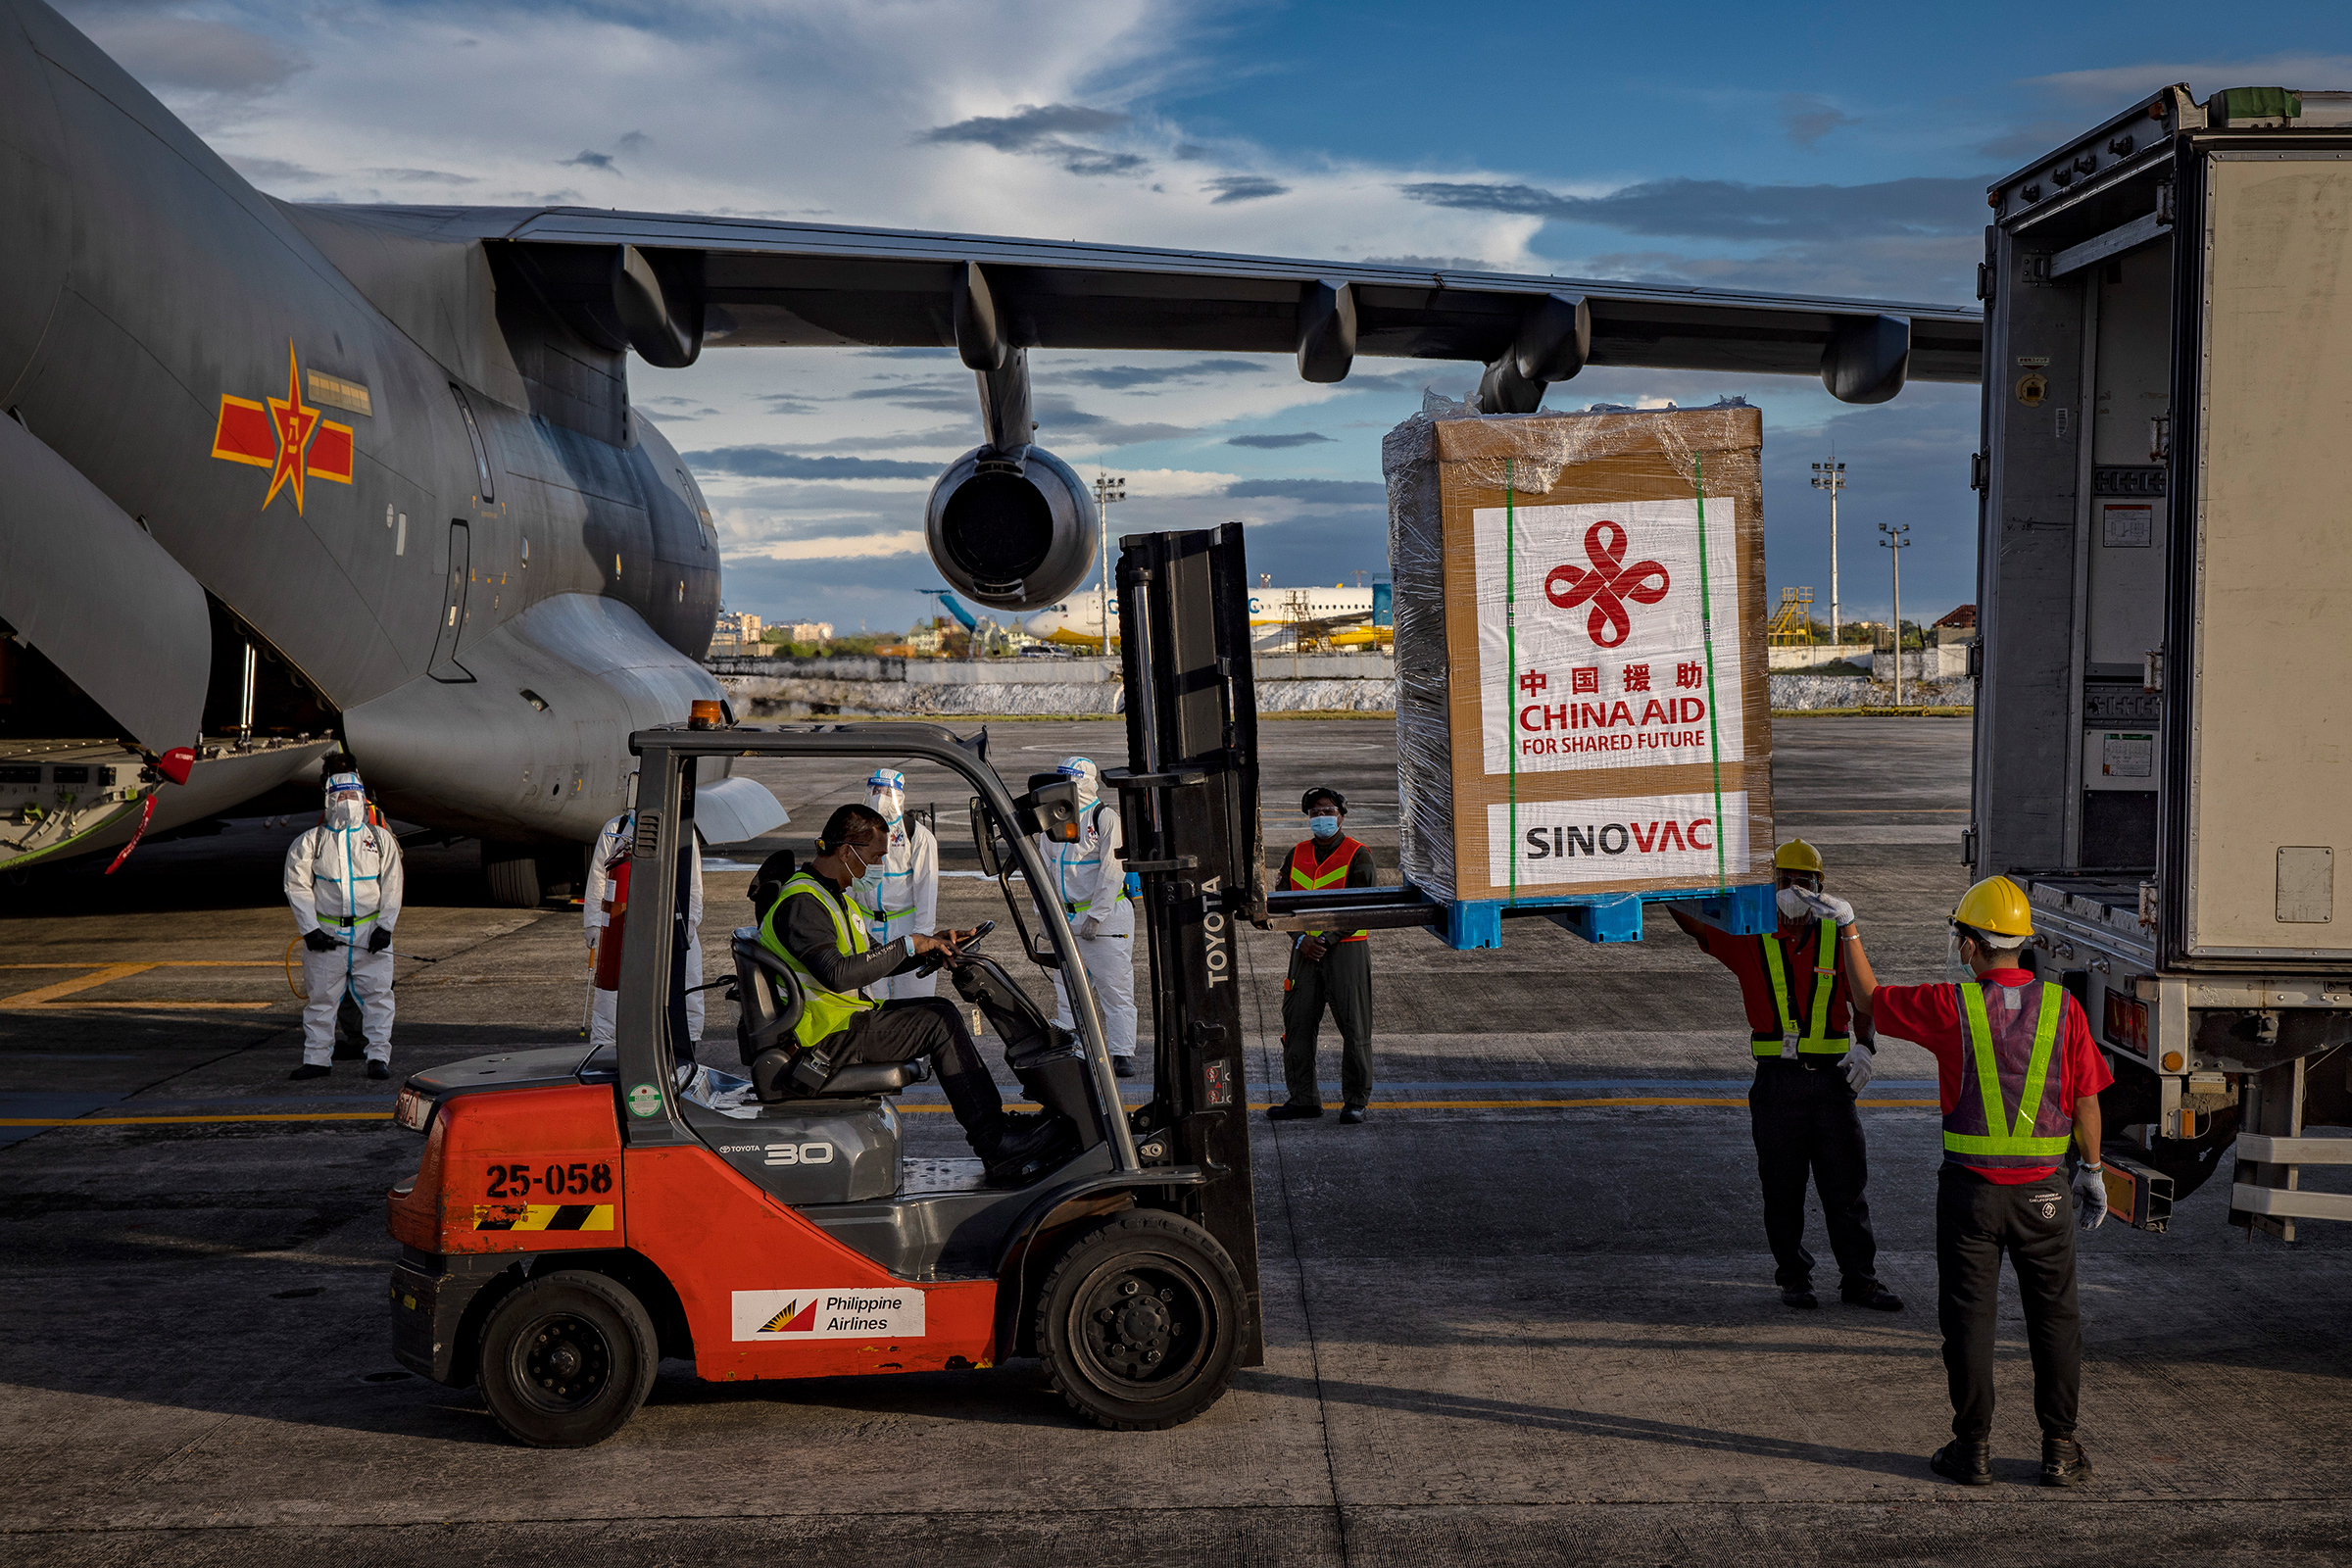 A crate containing Sinovac Biotech COVID-19 vaccines is loaded into a truck upon arriving at Ninoy Aquino International Airport on Feb. 28, 2021 in Manila. Sunday's delivery marks the first time the Philippines received official coronavirus vaccines, the last country in ASEAN to do so